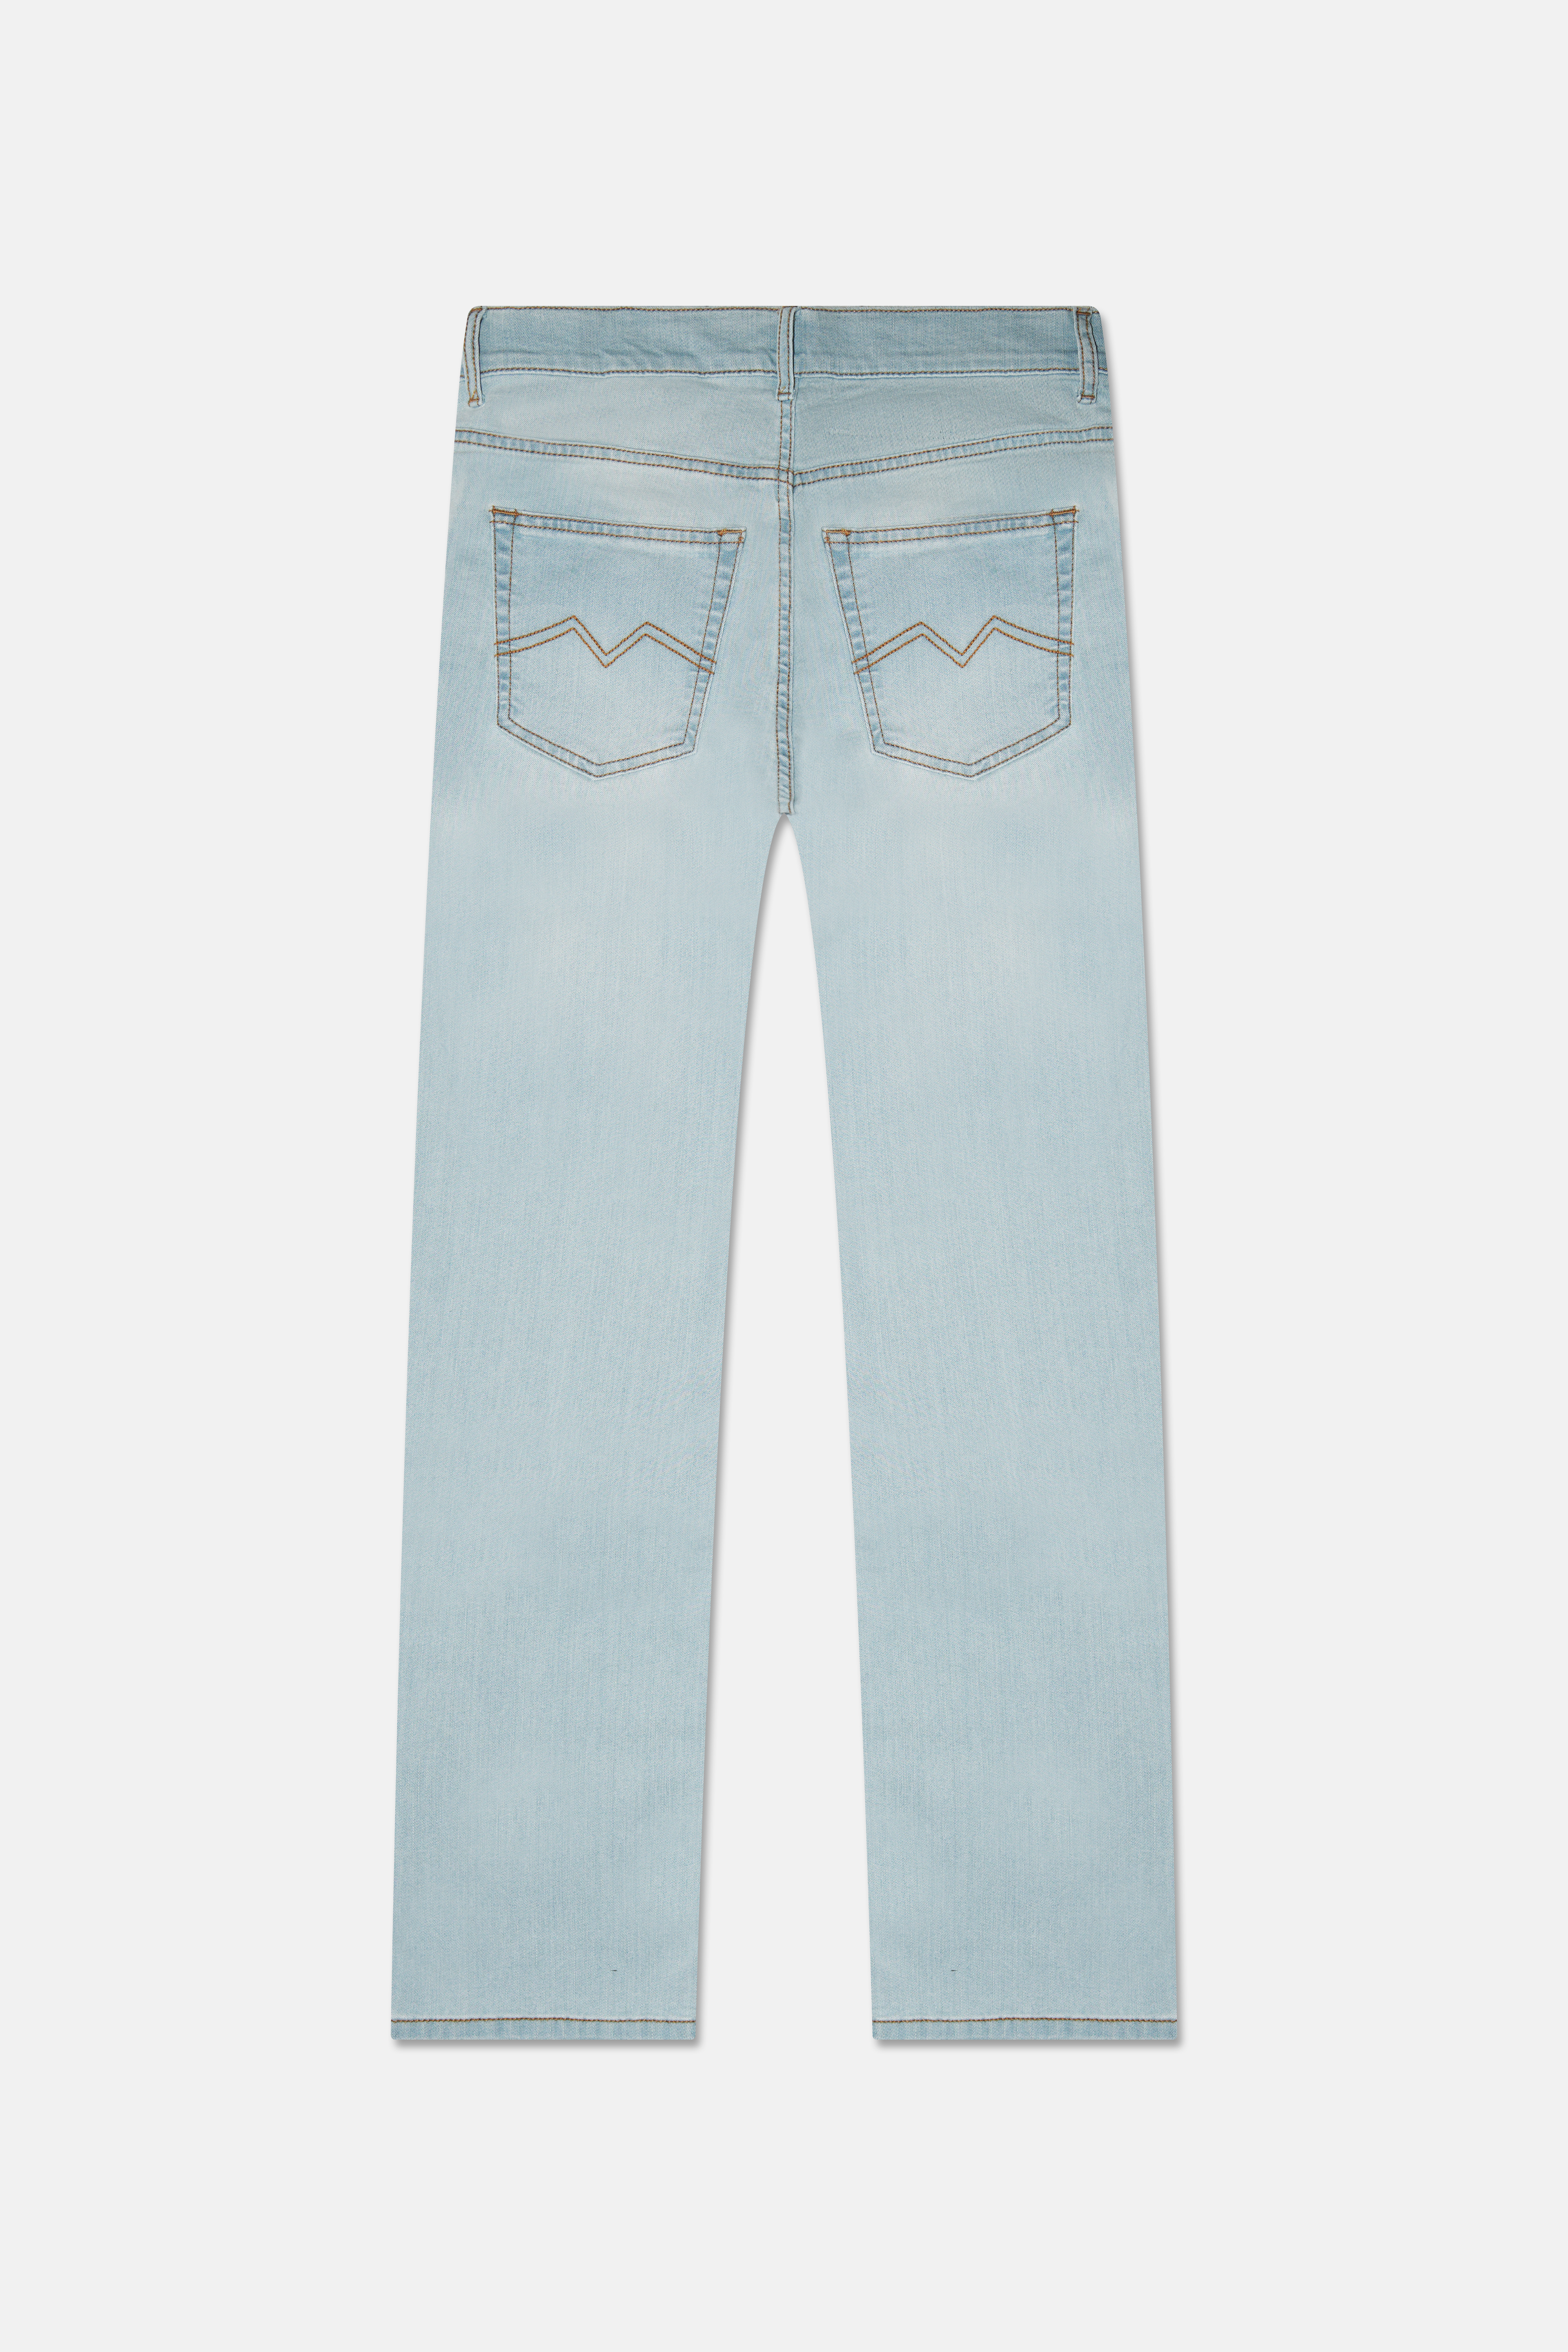 Faded Light Blue Jeans